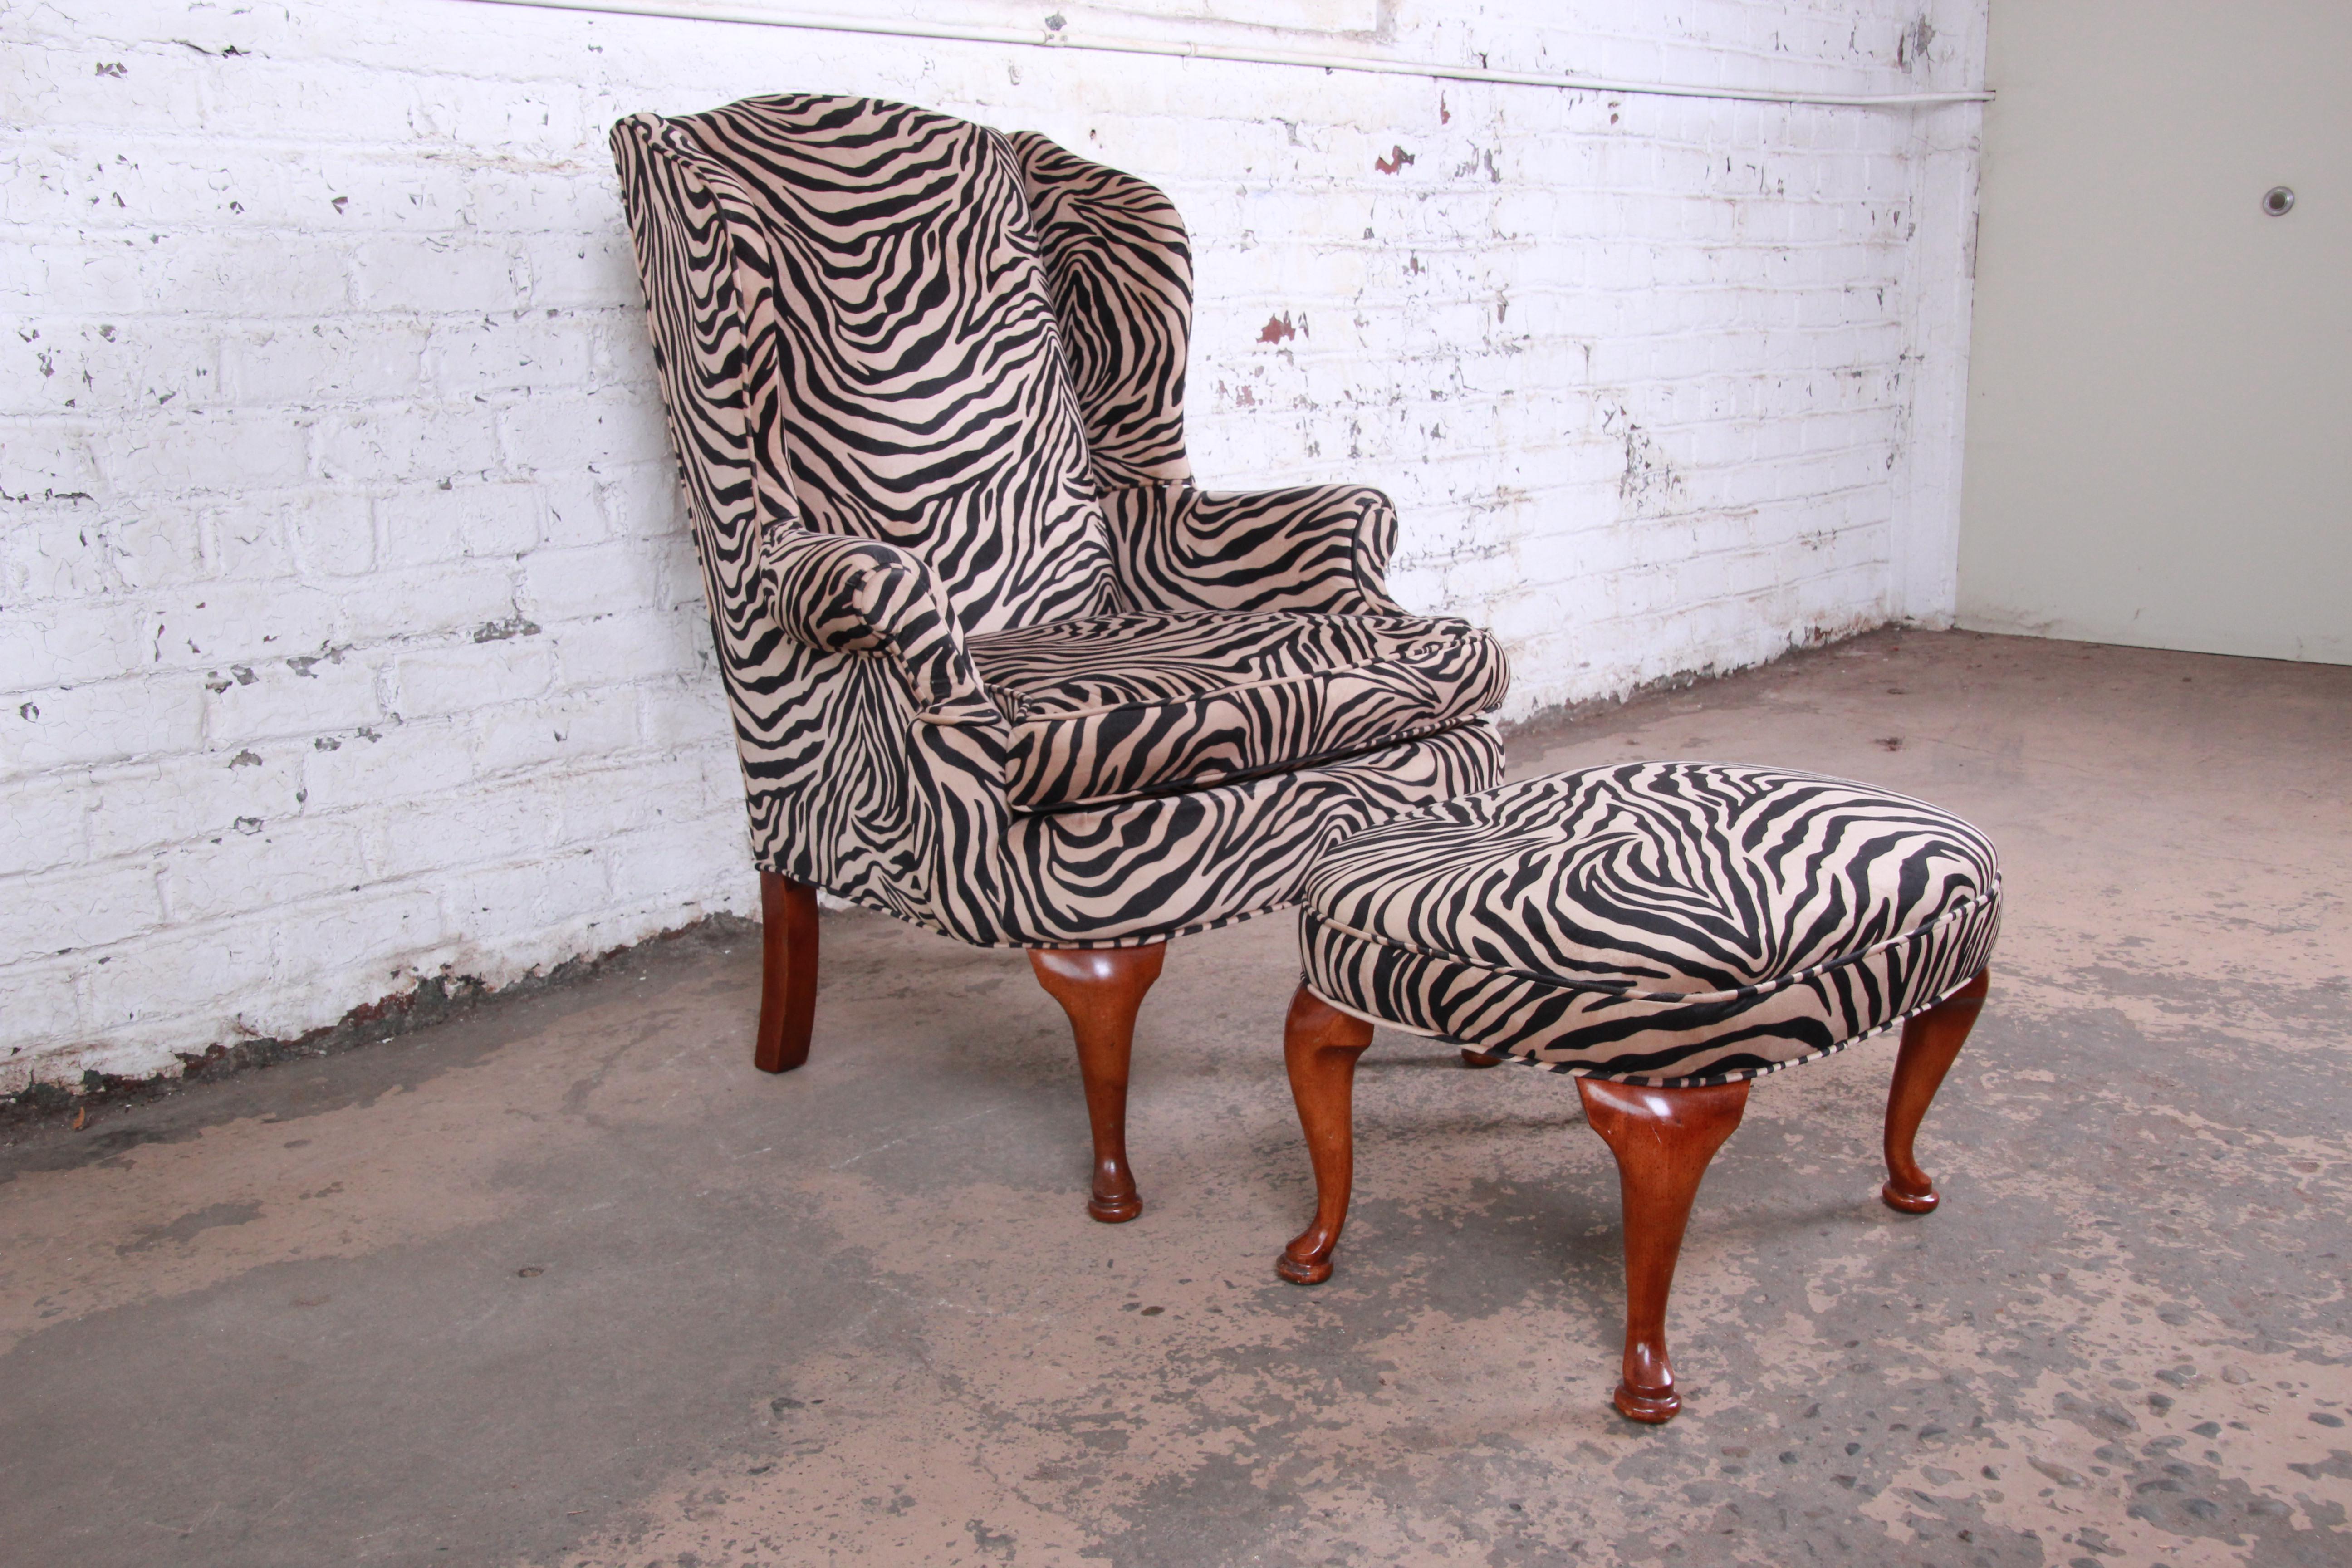 A gorgeous vintage Queen Anne style wingback lounge chair and ottoman. The set features beautiful zebra print upholstery and solid walnut legs. A great mix of modern and traditional styles. The set is clean, very comfortable, and ready for immediate